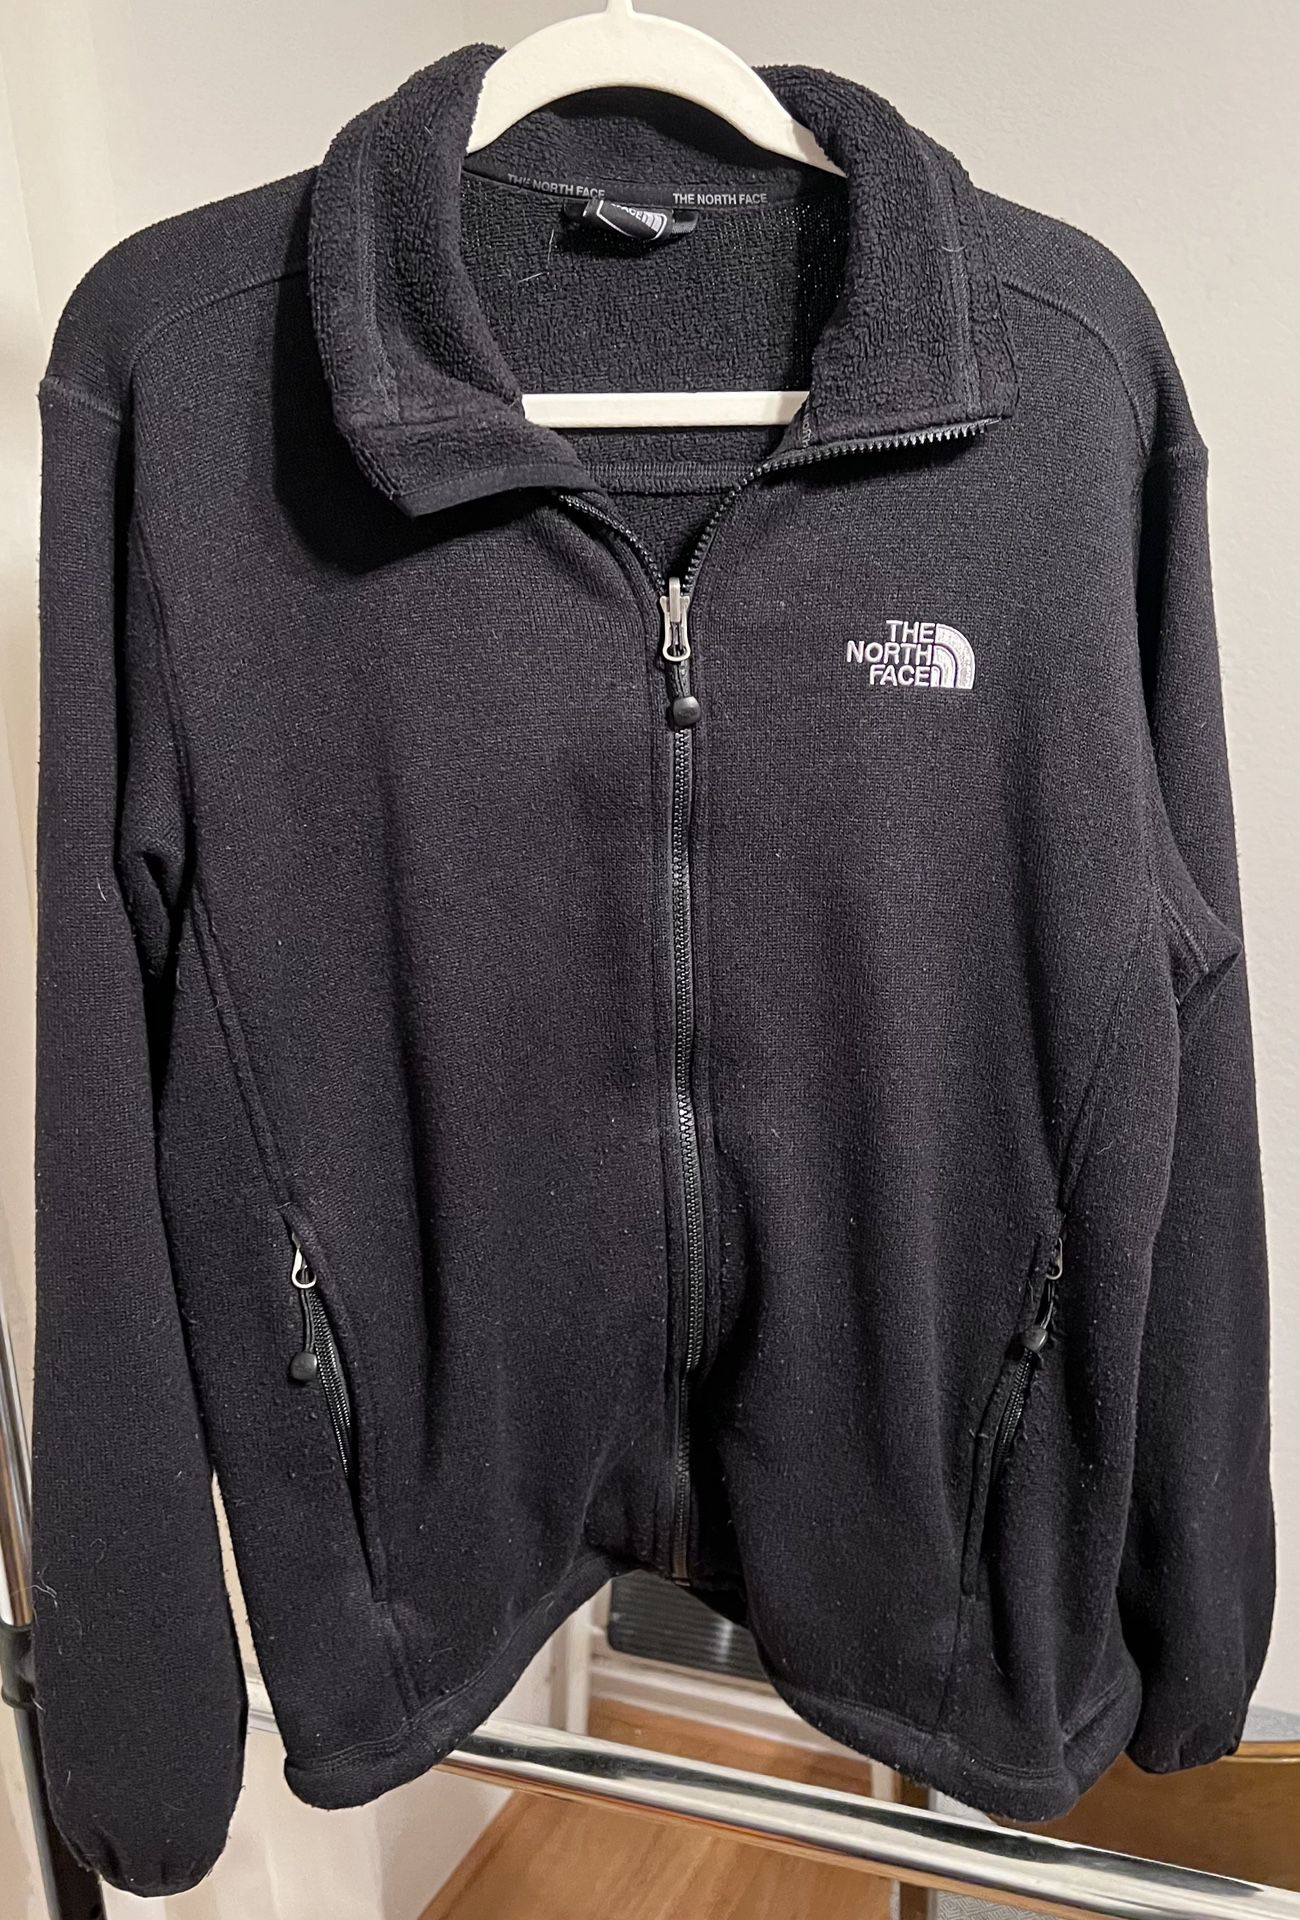 The North Face Mens Size M Jacket / Coat